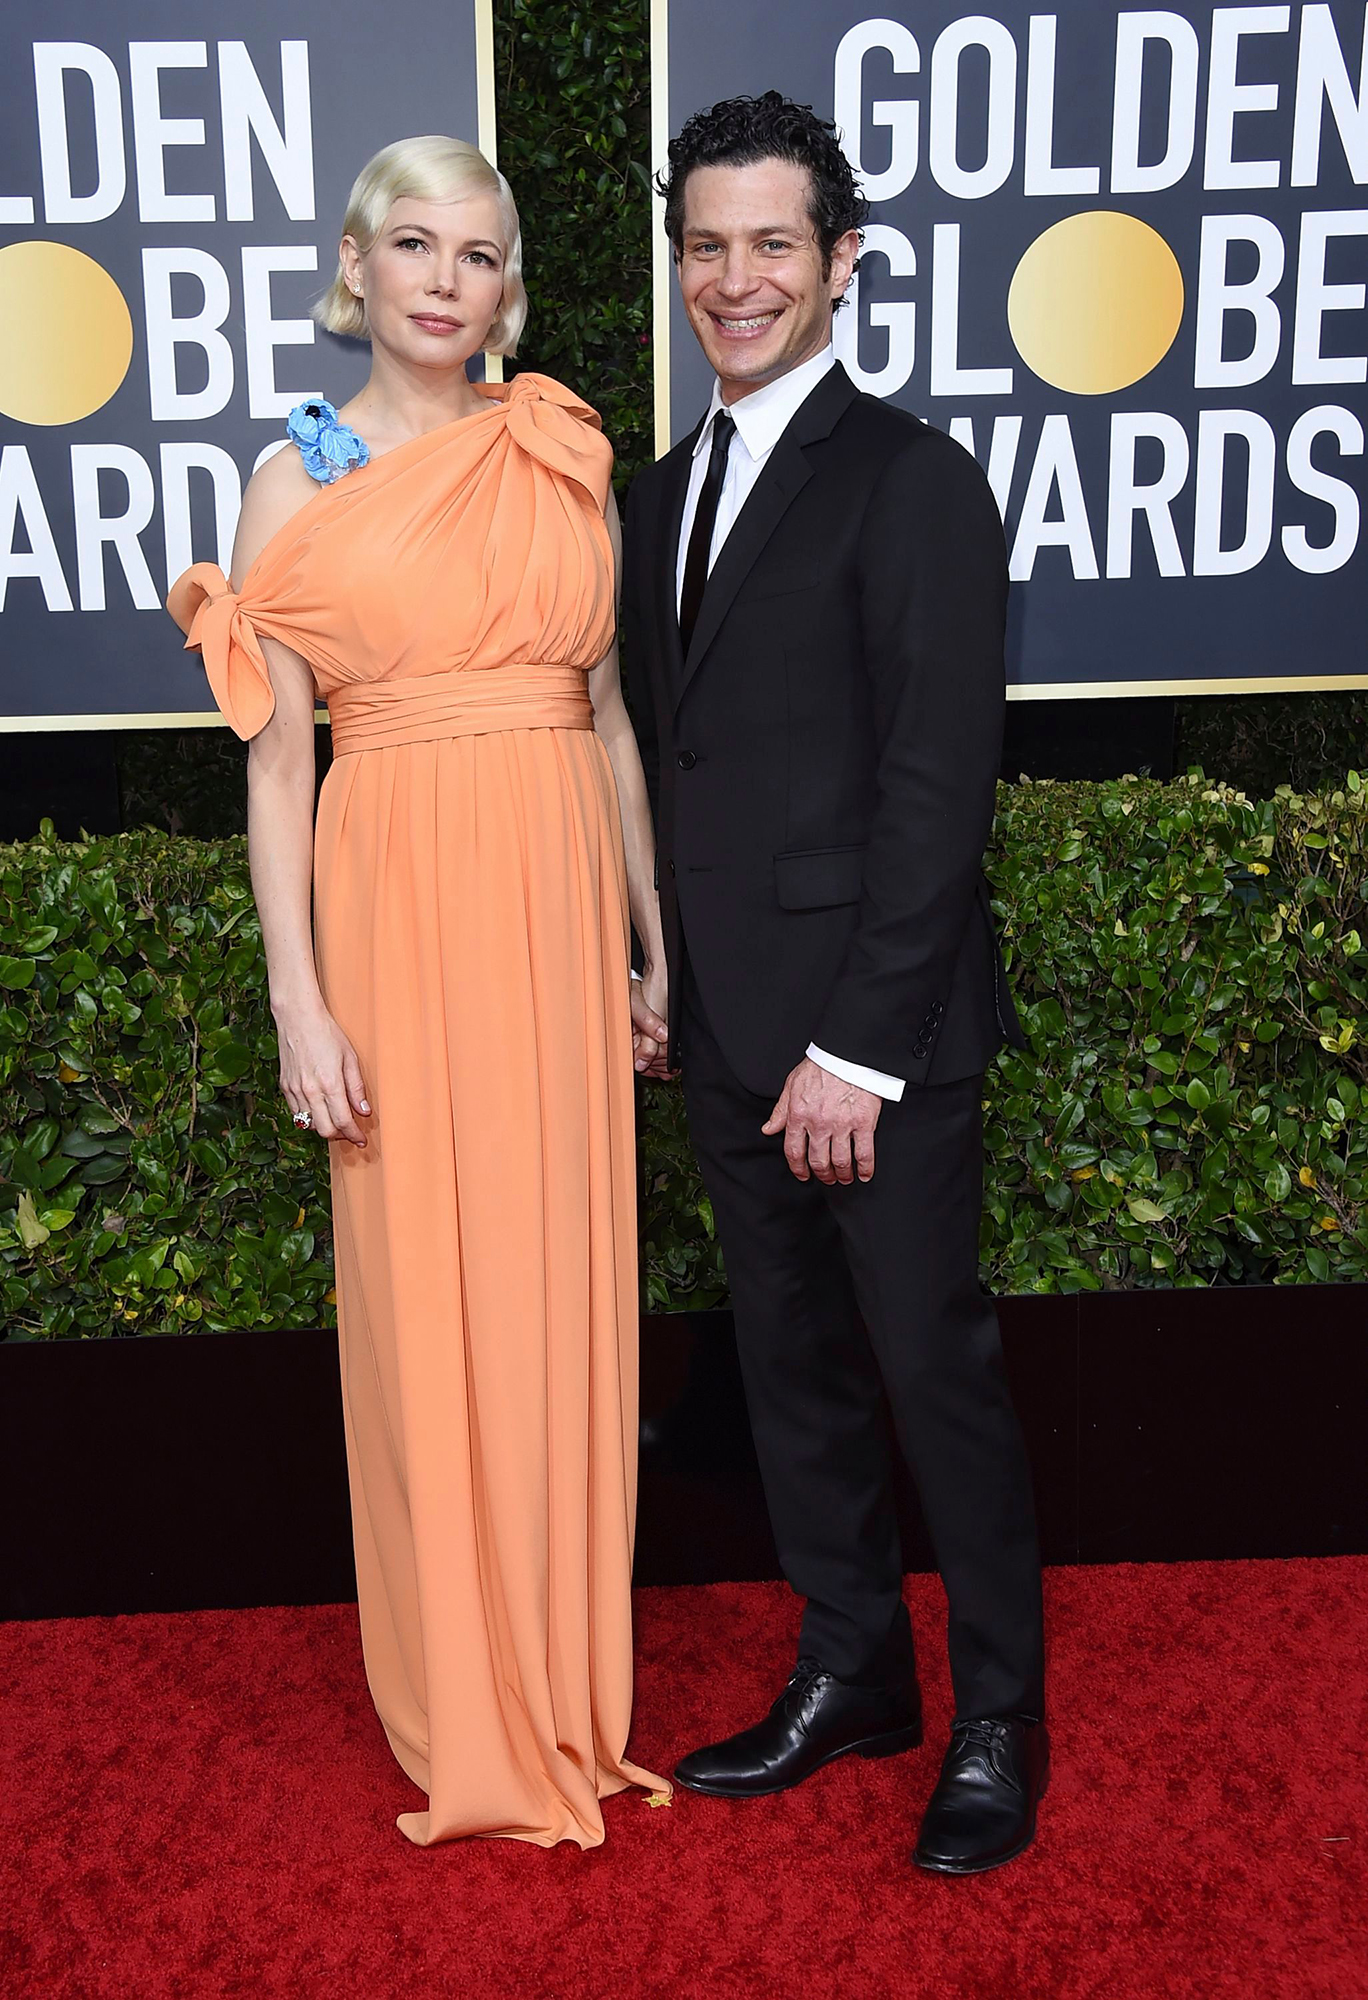 Golden Globes 2020: Michelle Williams Shows Off Baby Bump With Fiance Thomas Kail